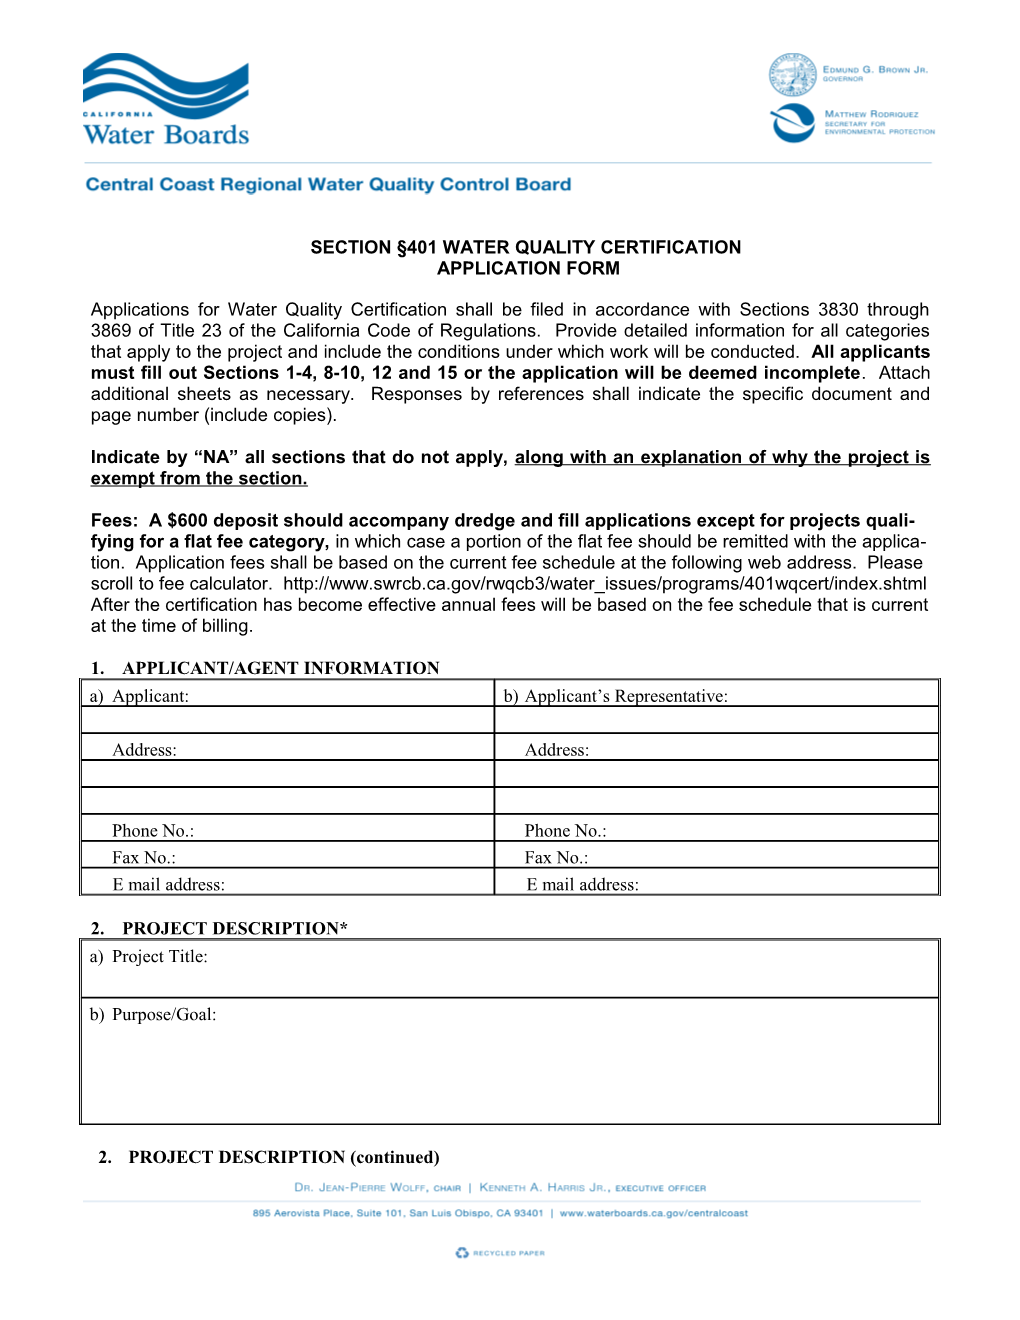 Section 401 Water Quality Certification Application Form